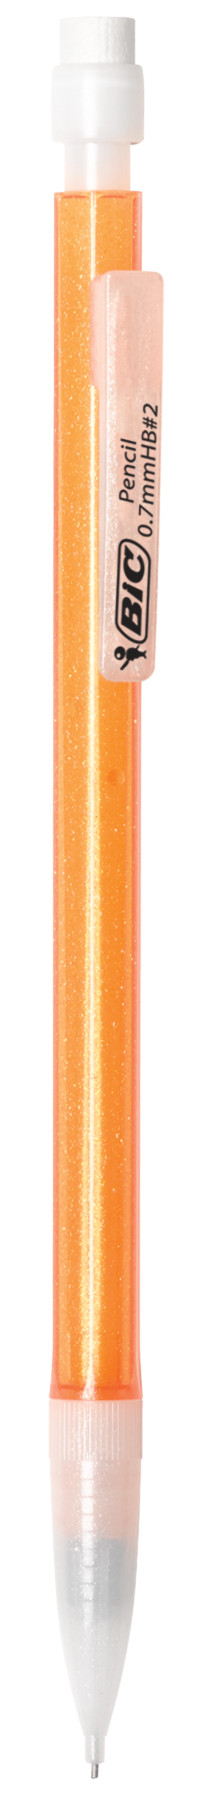 BIC Xtra-Sparkle No. 2 Mechanical Pencils with Erasers, Medium Point (0.7mm), 24 Pencils - image 7 of 7